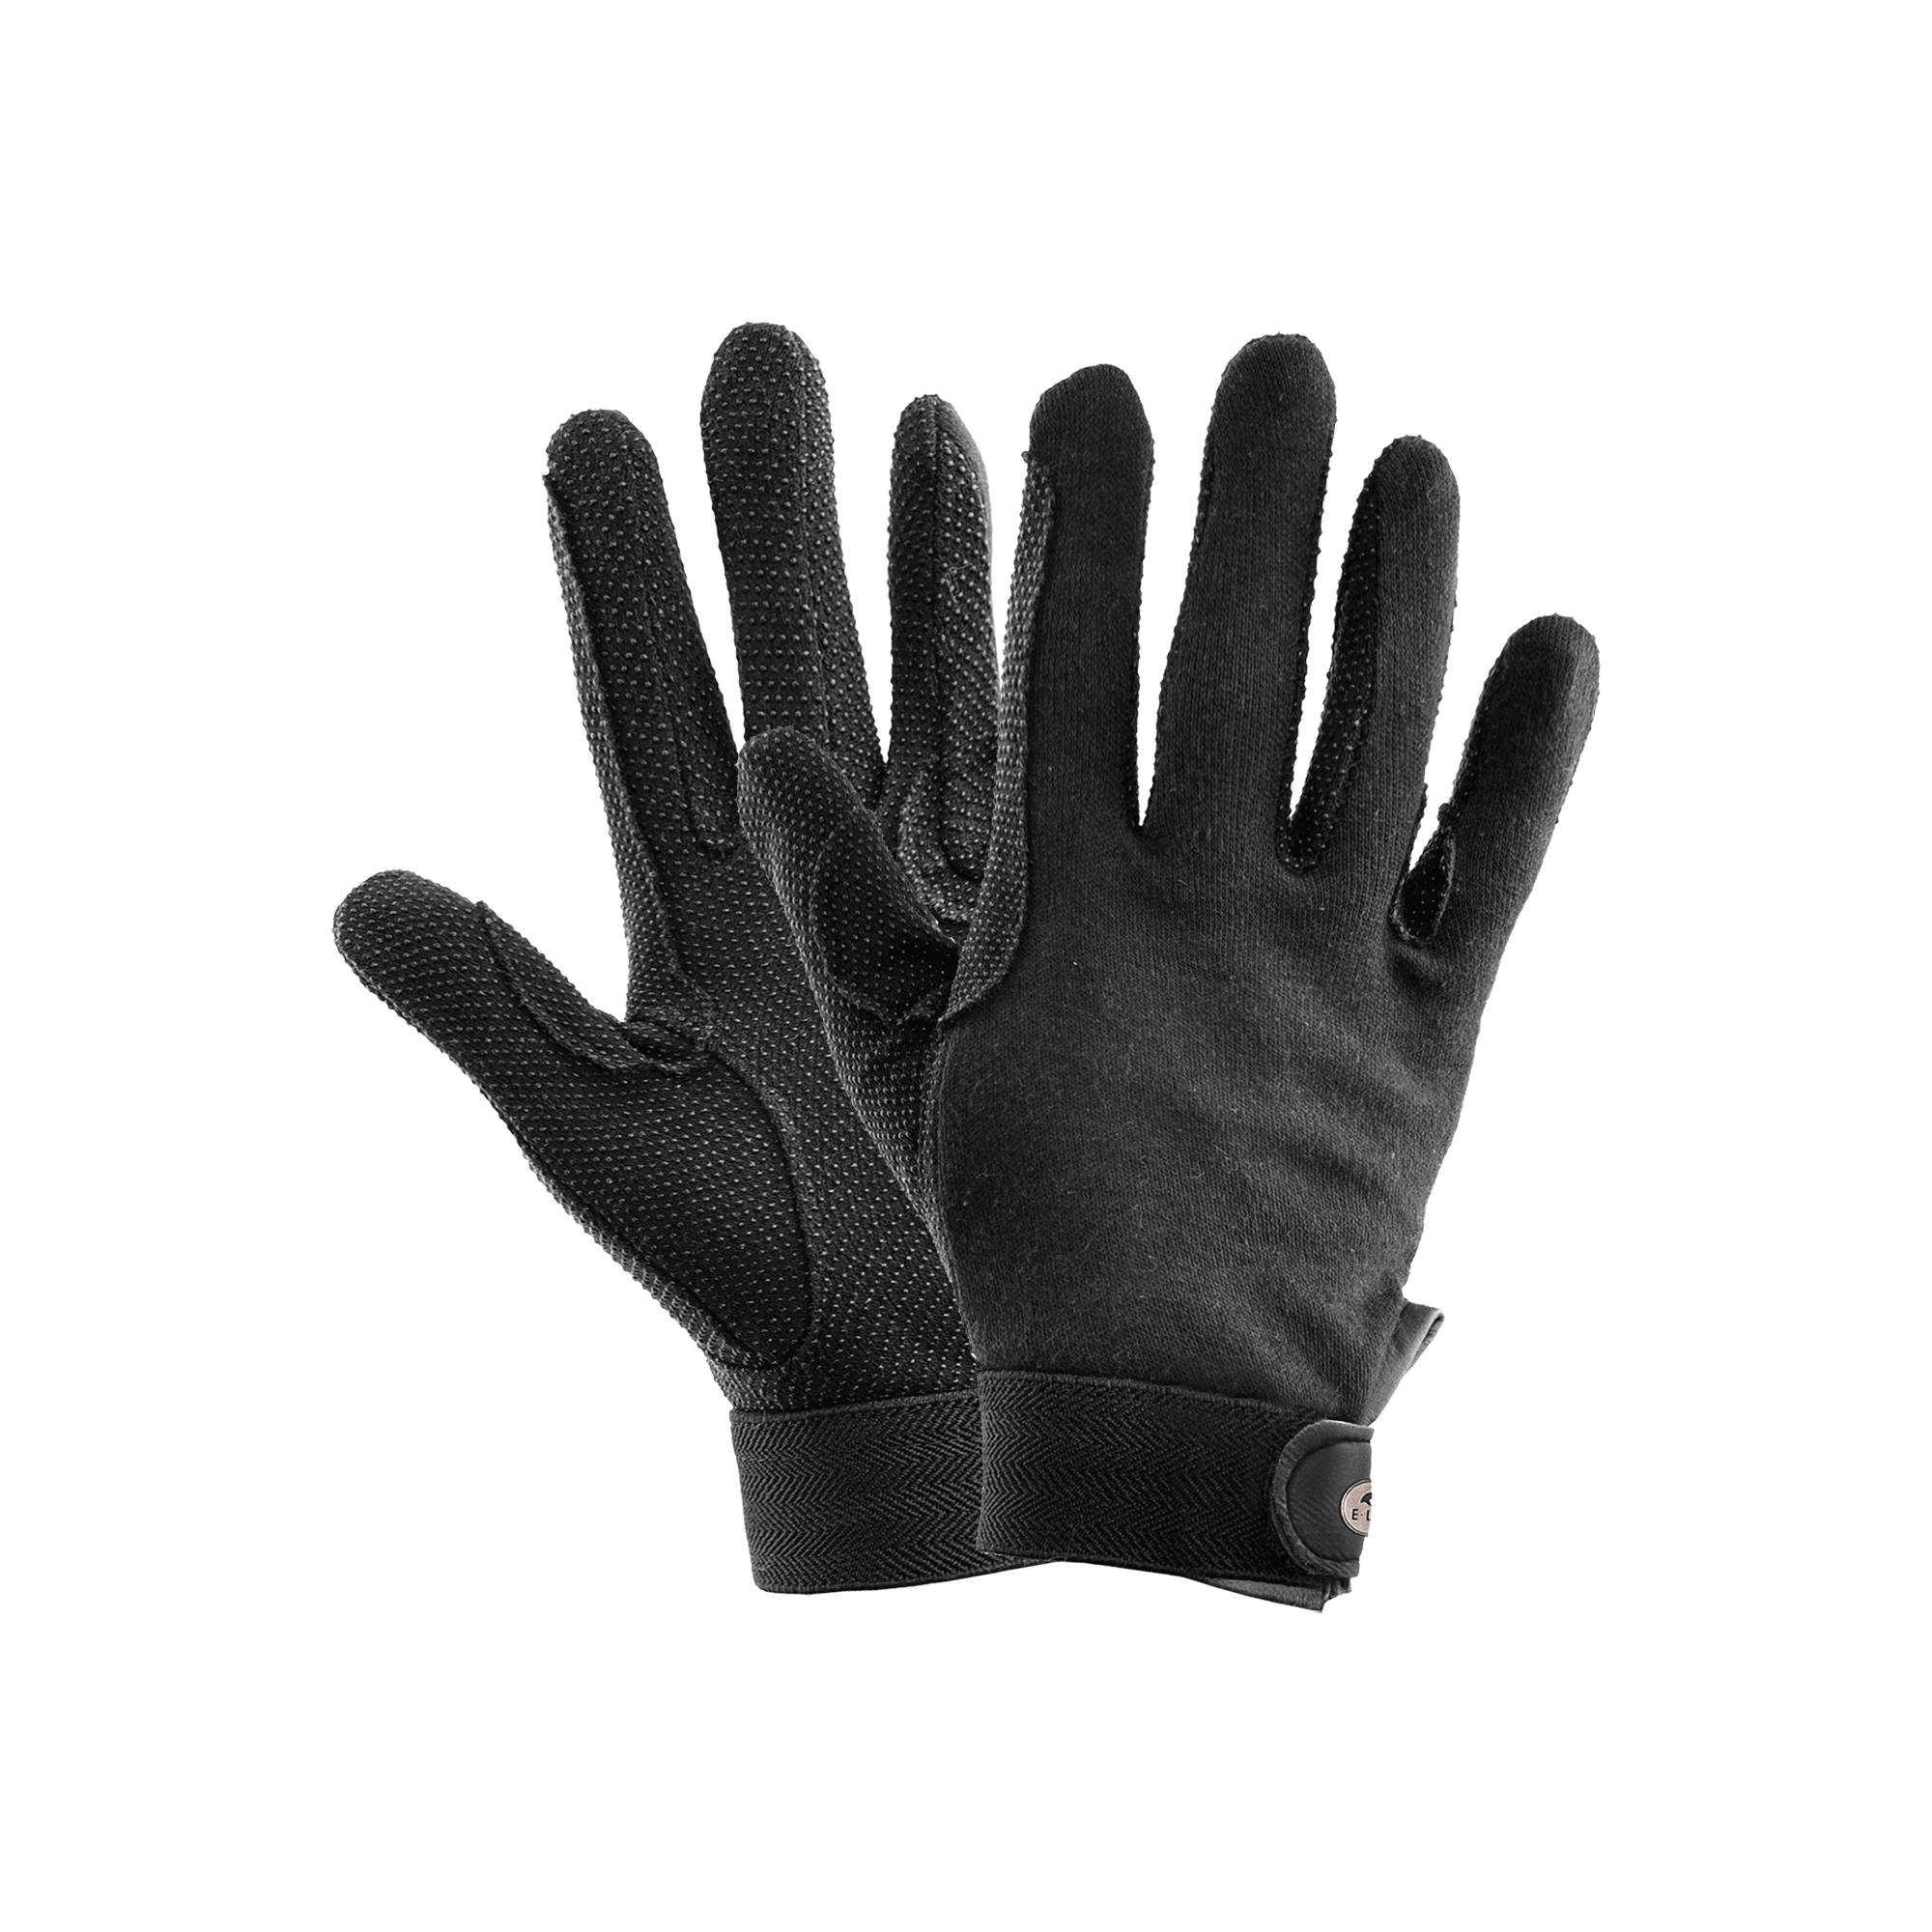 Equestrian Horse Riding Gloves LADIES Synthetic Leather Cotton Dublin Grey 